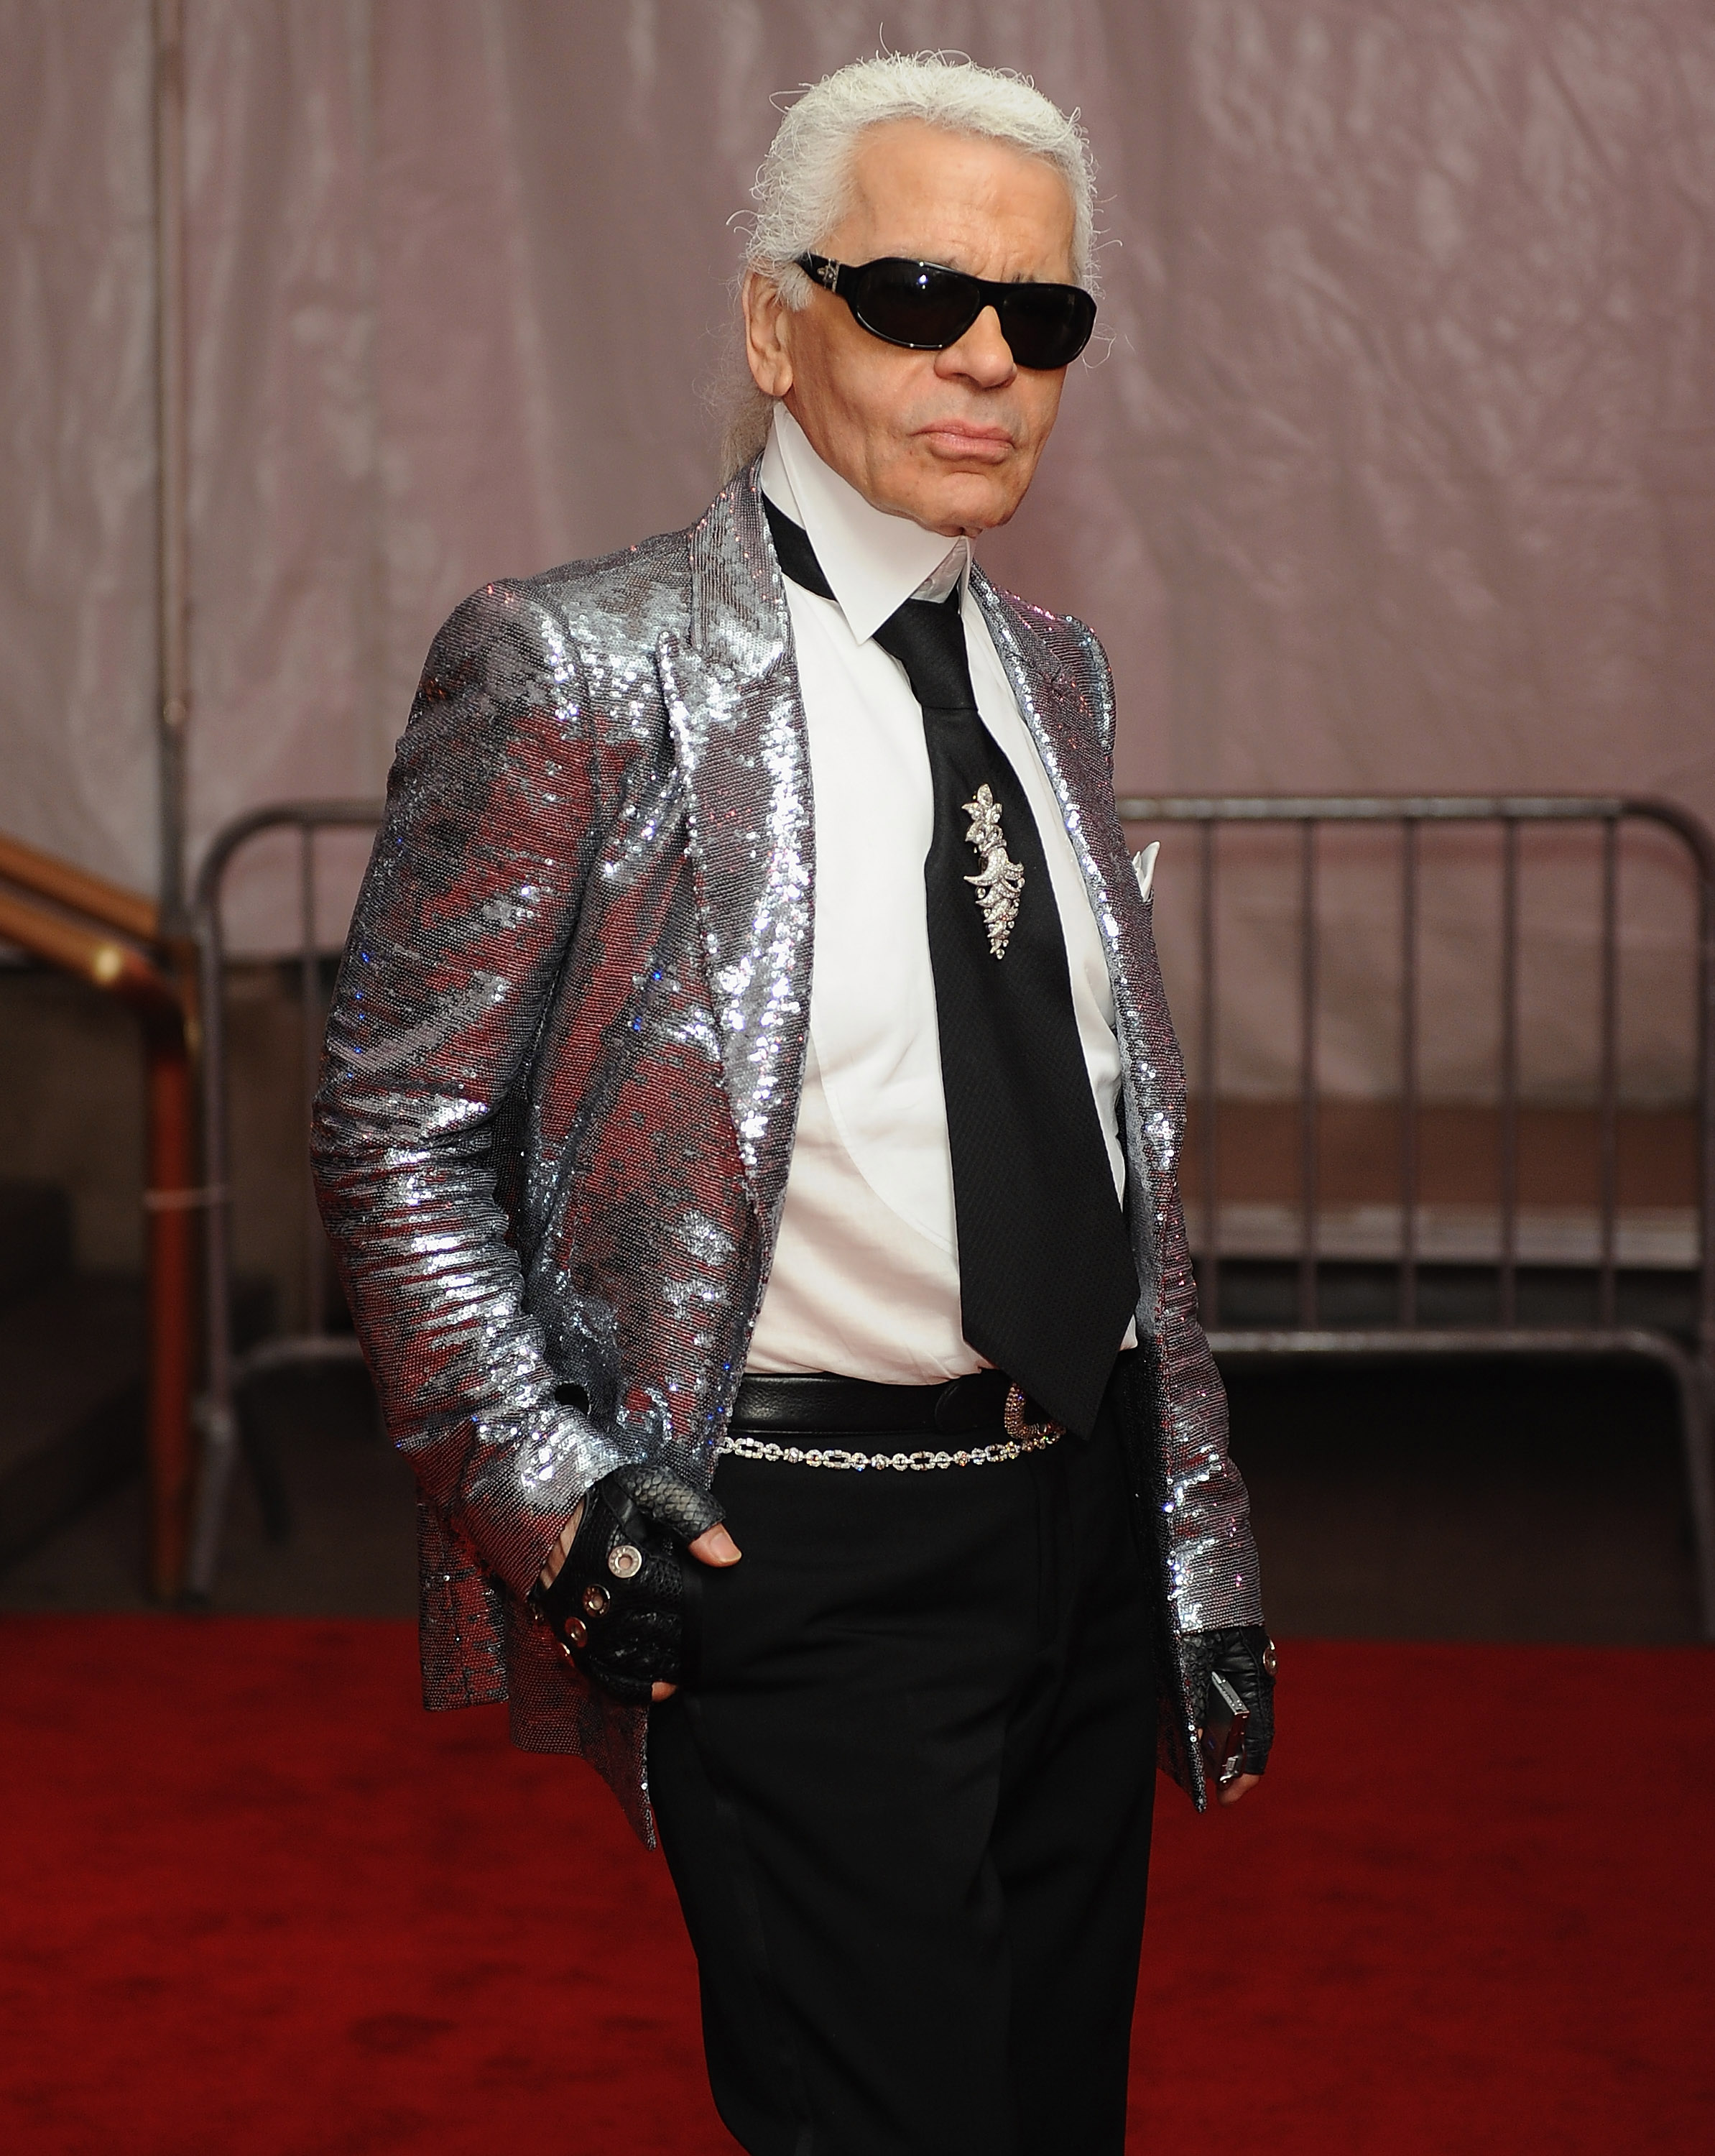 Karl Lagerfeld departs the Metropolitan Museum of Art Costume Institute Gala, Superheroes: Fashion and Fantasy, in New York City, on May 5, 2008. | Source: Getty Images